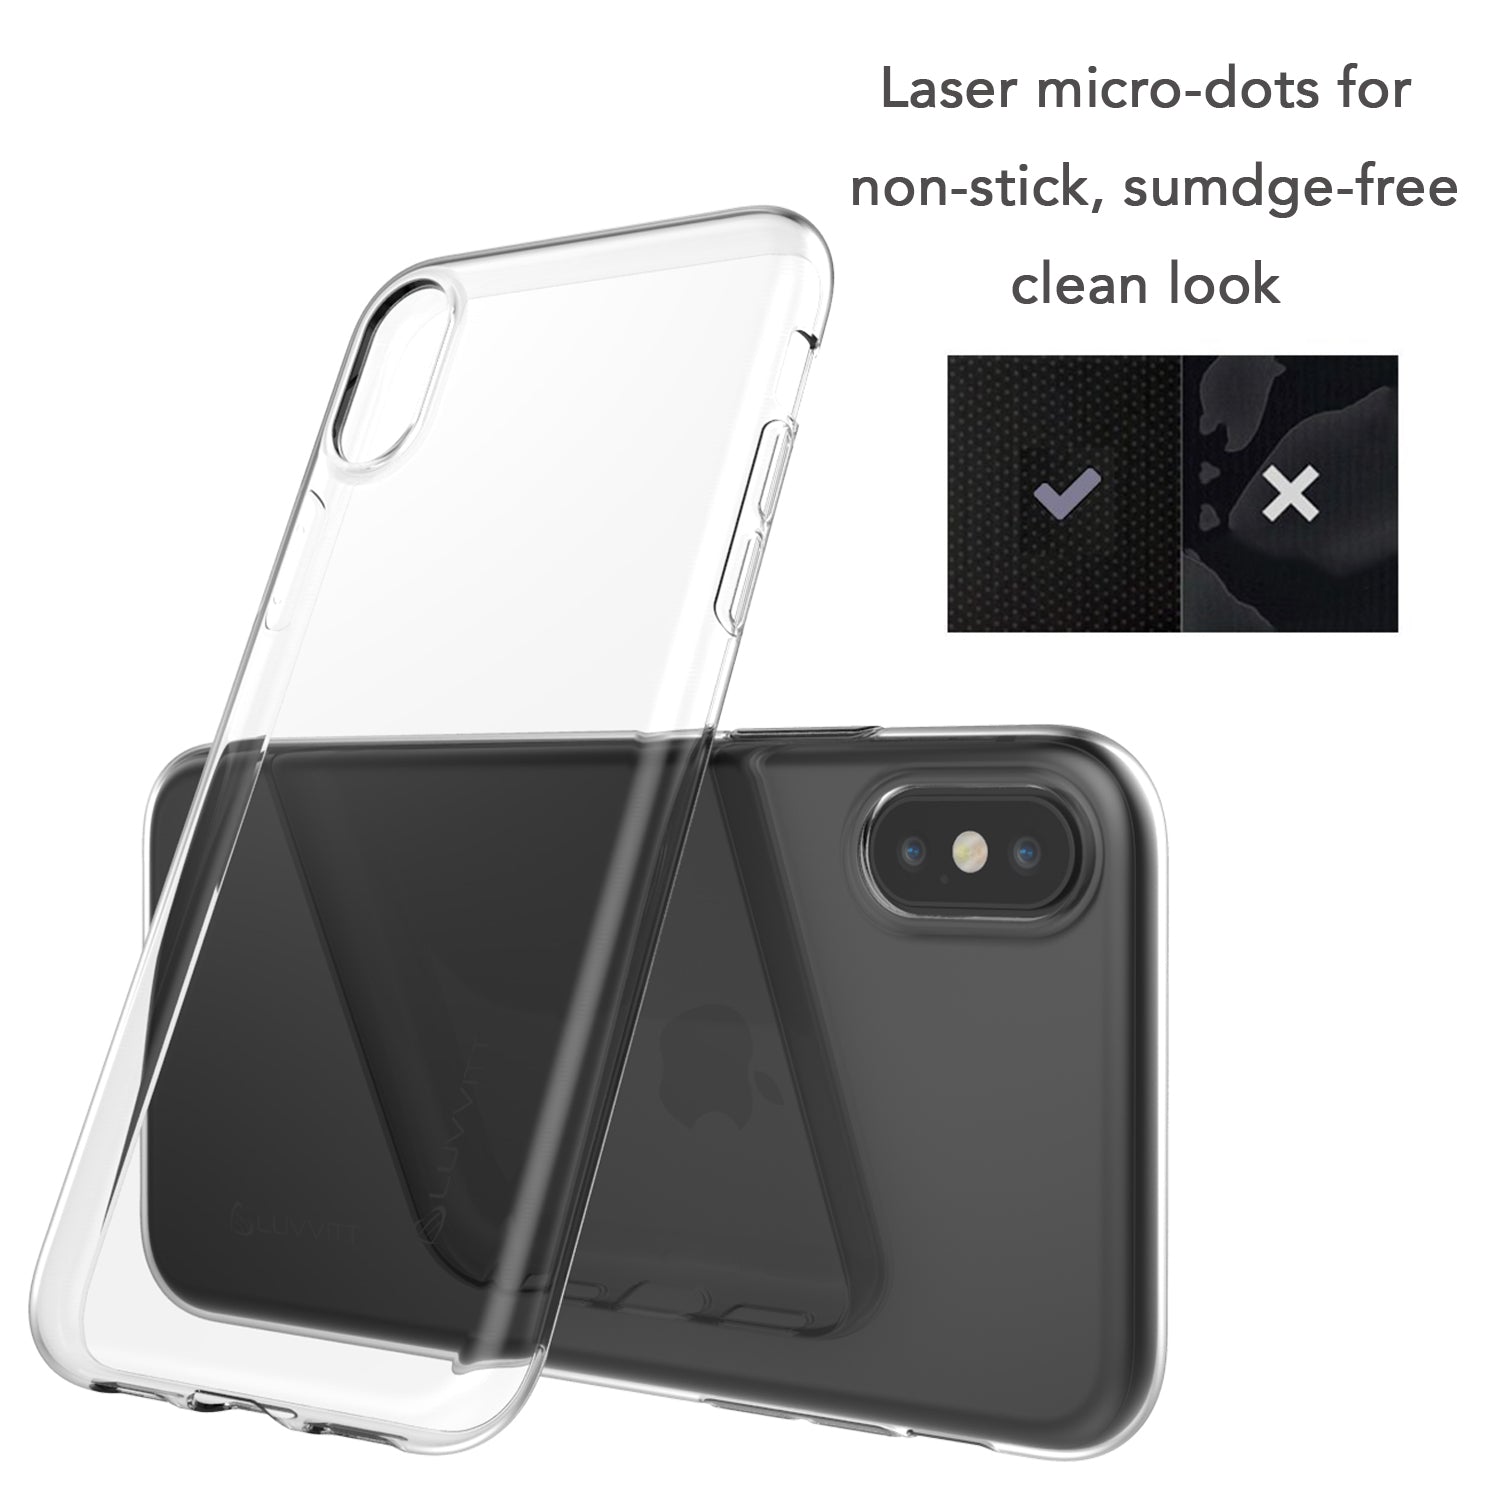 Luvvitt Clarity Case for iPhone XS / X Slim Flexible Rubber Light Cover - Clear